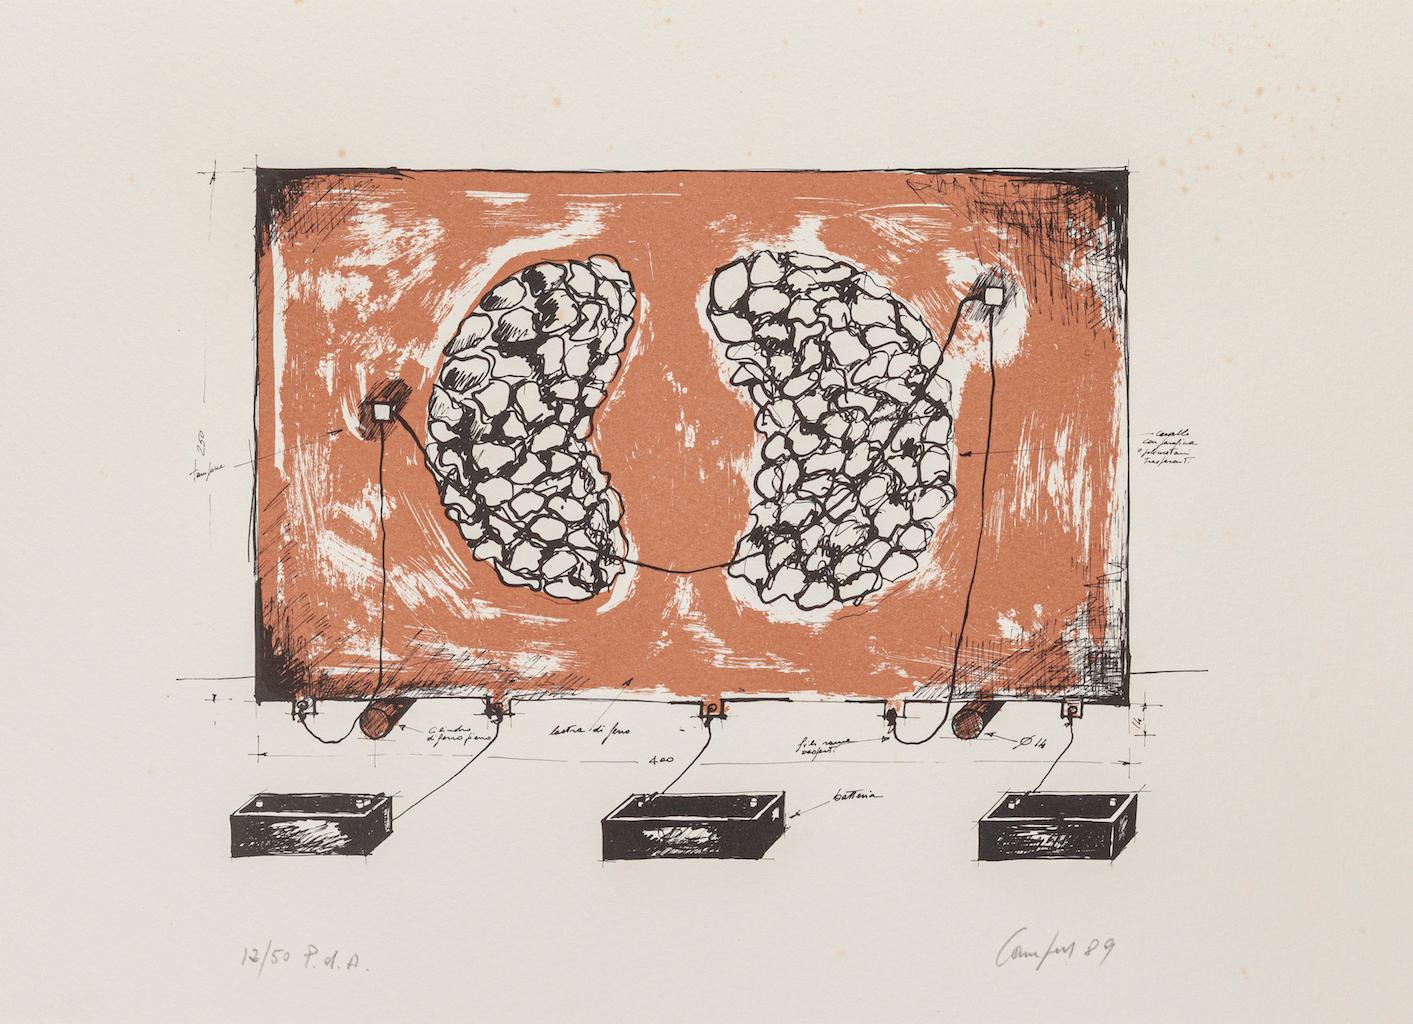 Composition  - Lithograph on Cardboard signed "Campus" - 1989